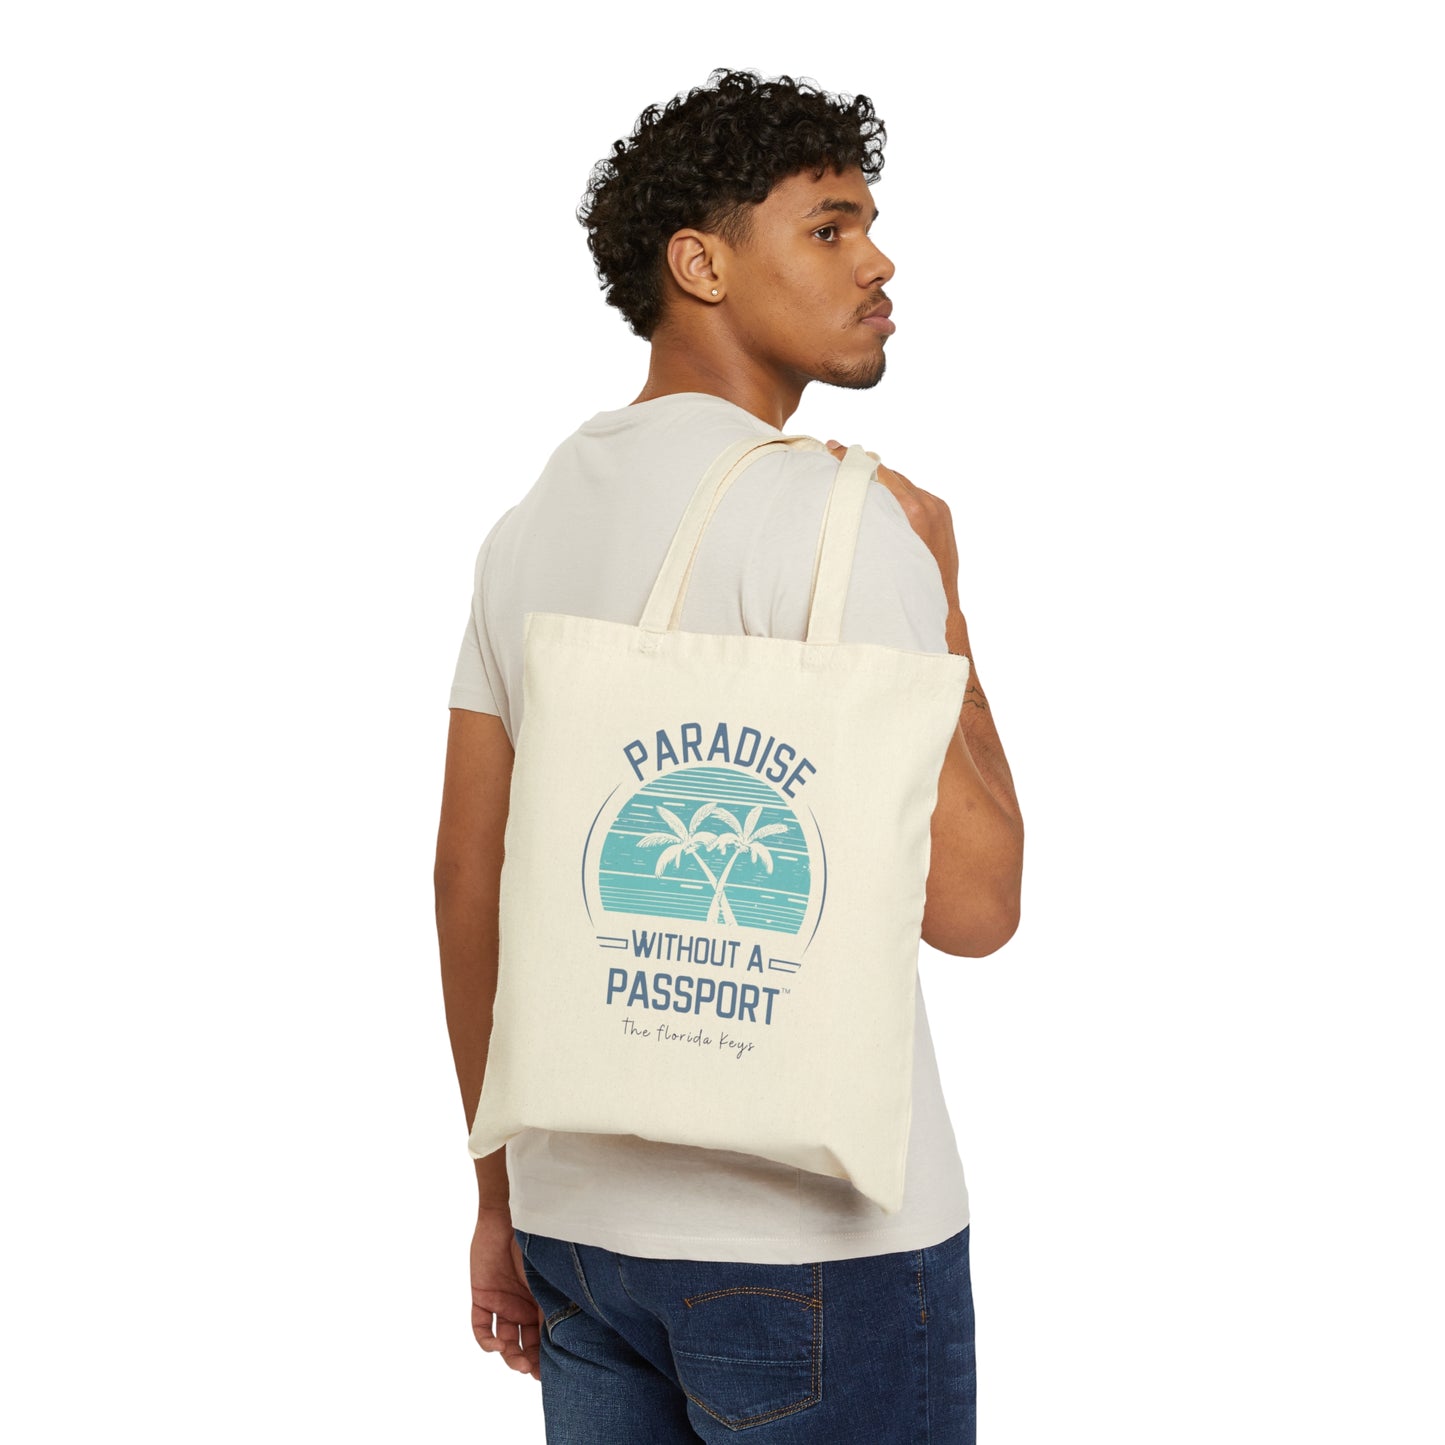 Paradise without a Passport Tote Bag - Beach tote florida keys